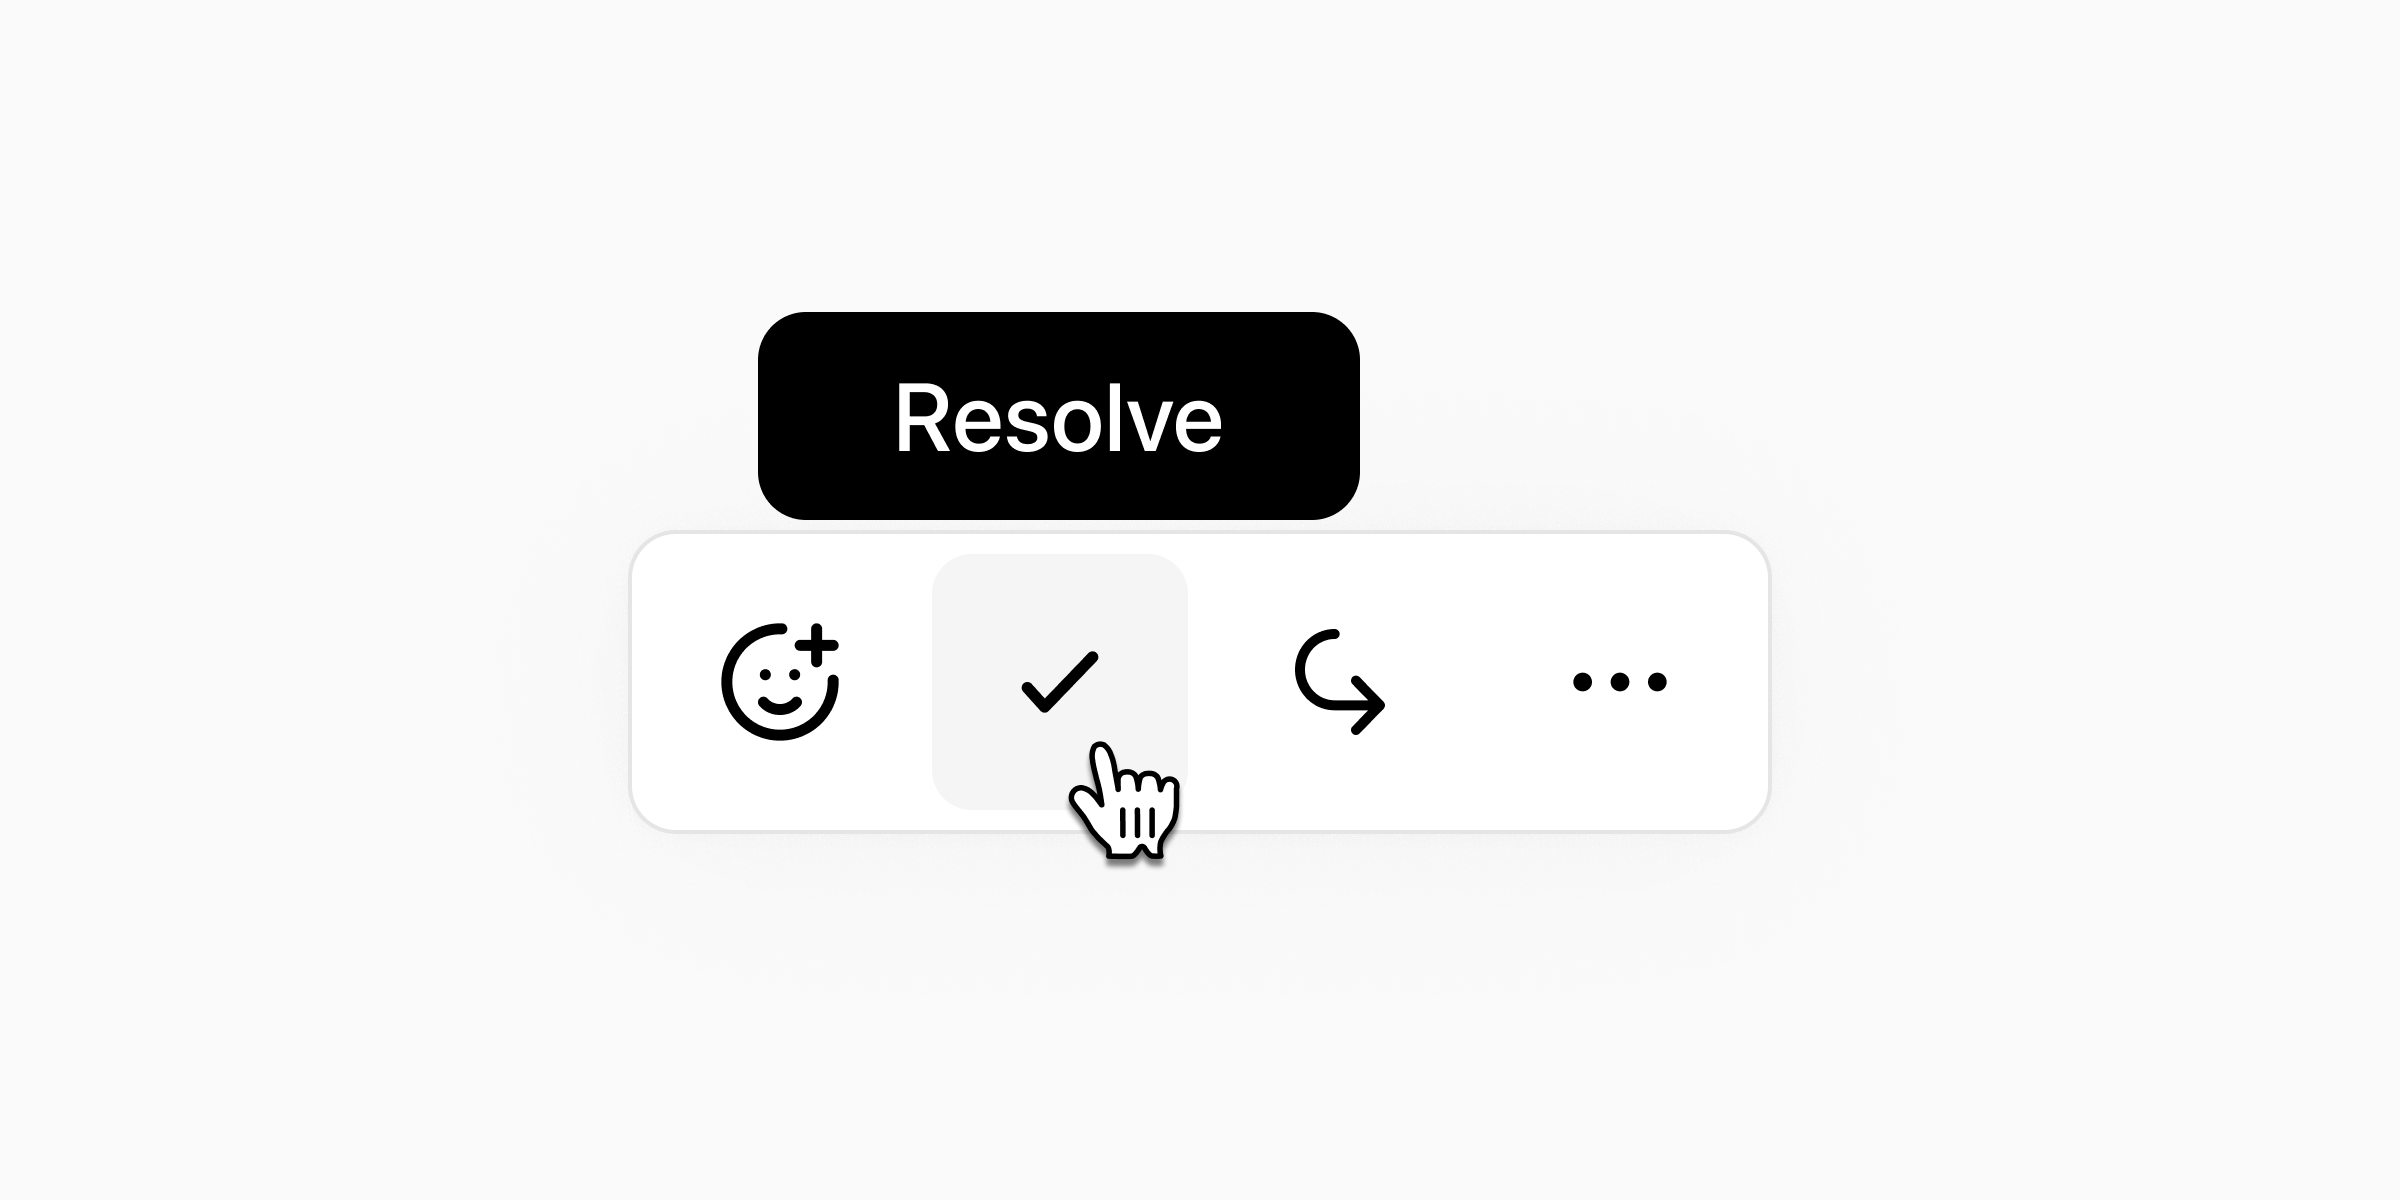 Feature image for Resolve comments